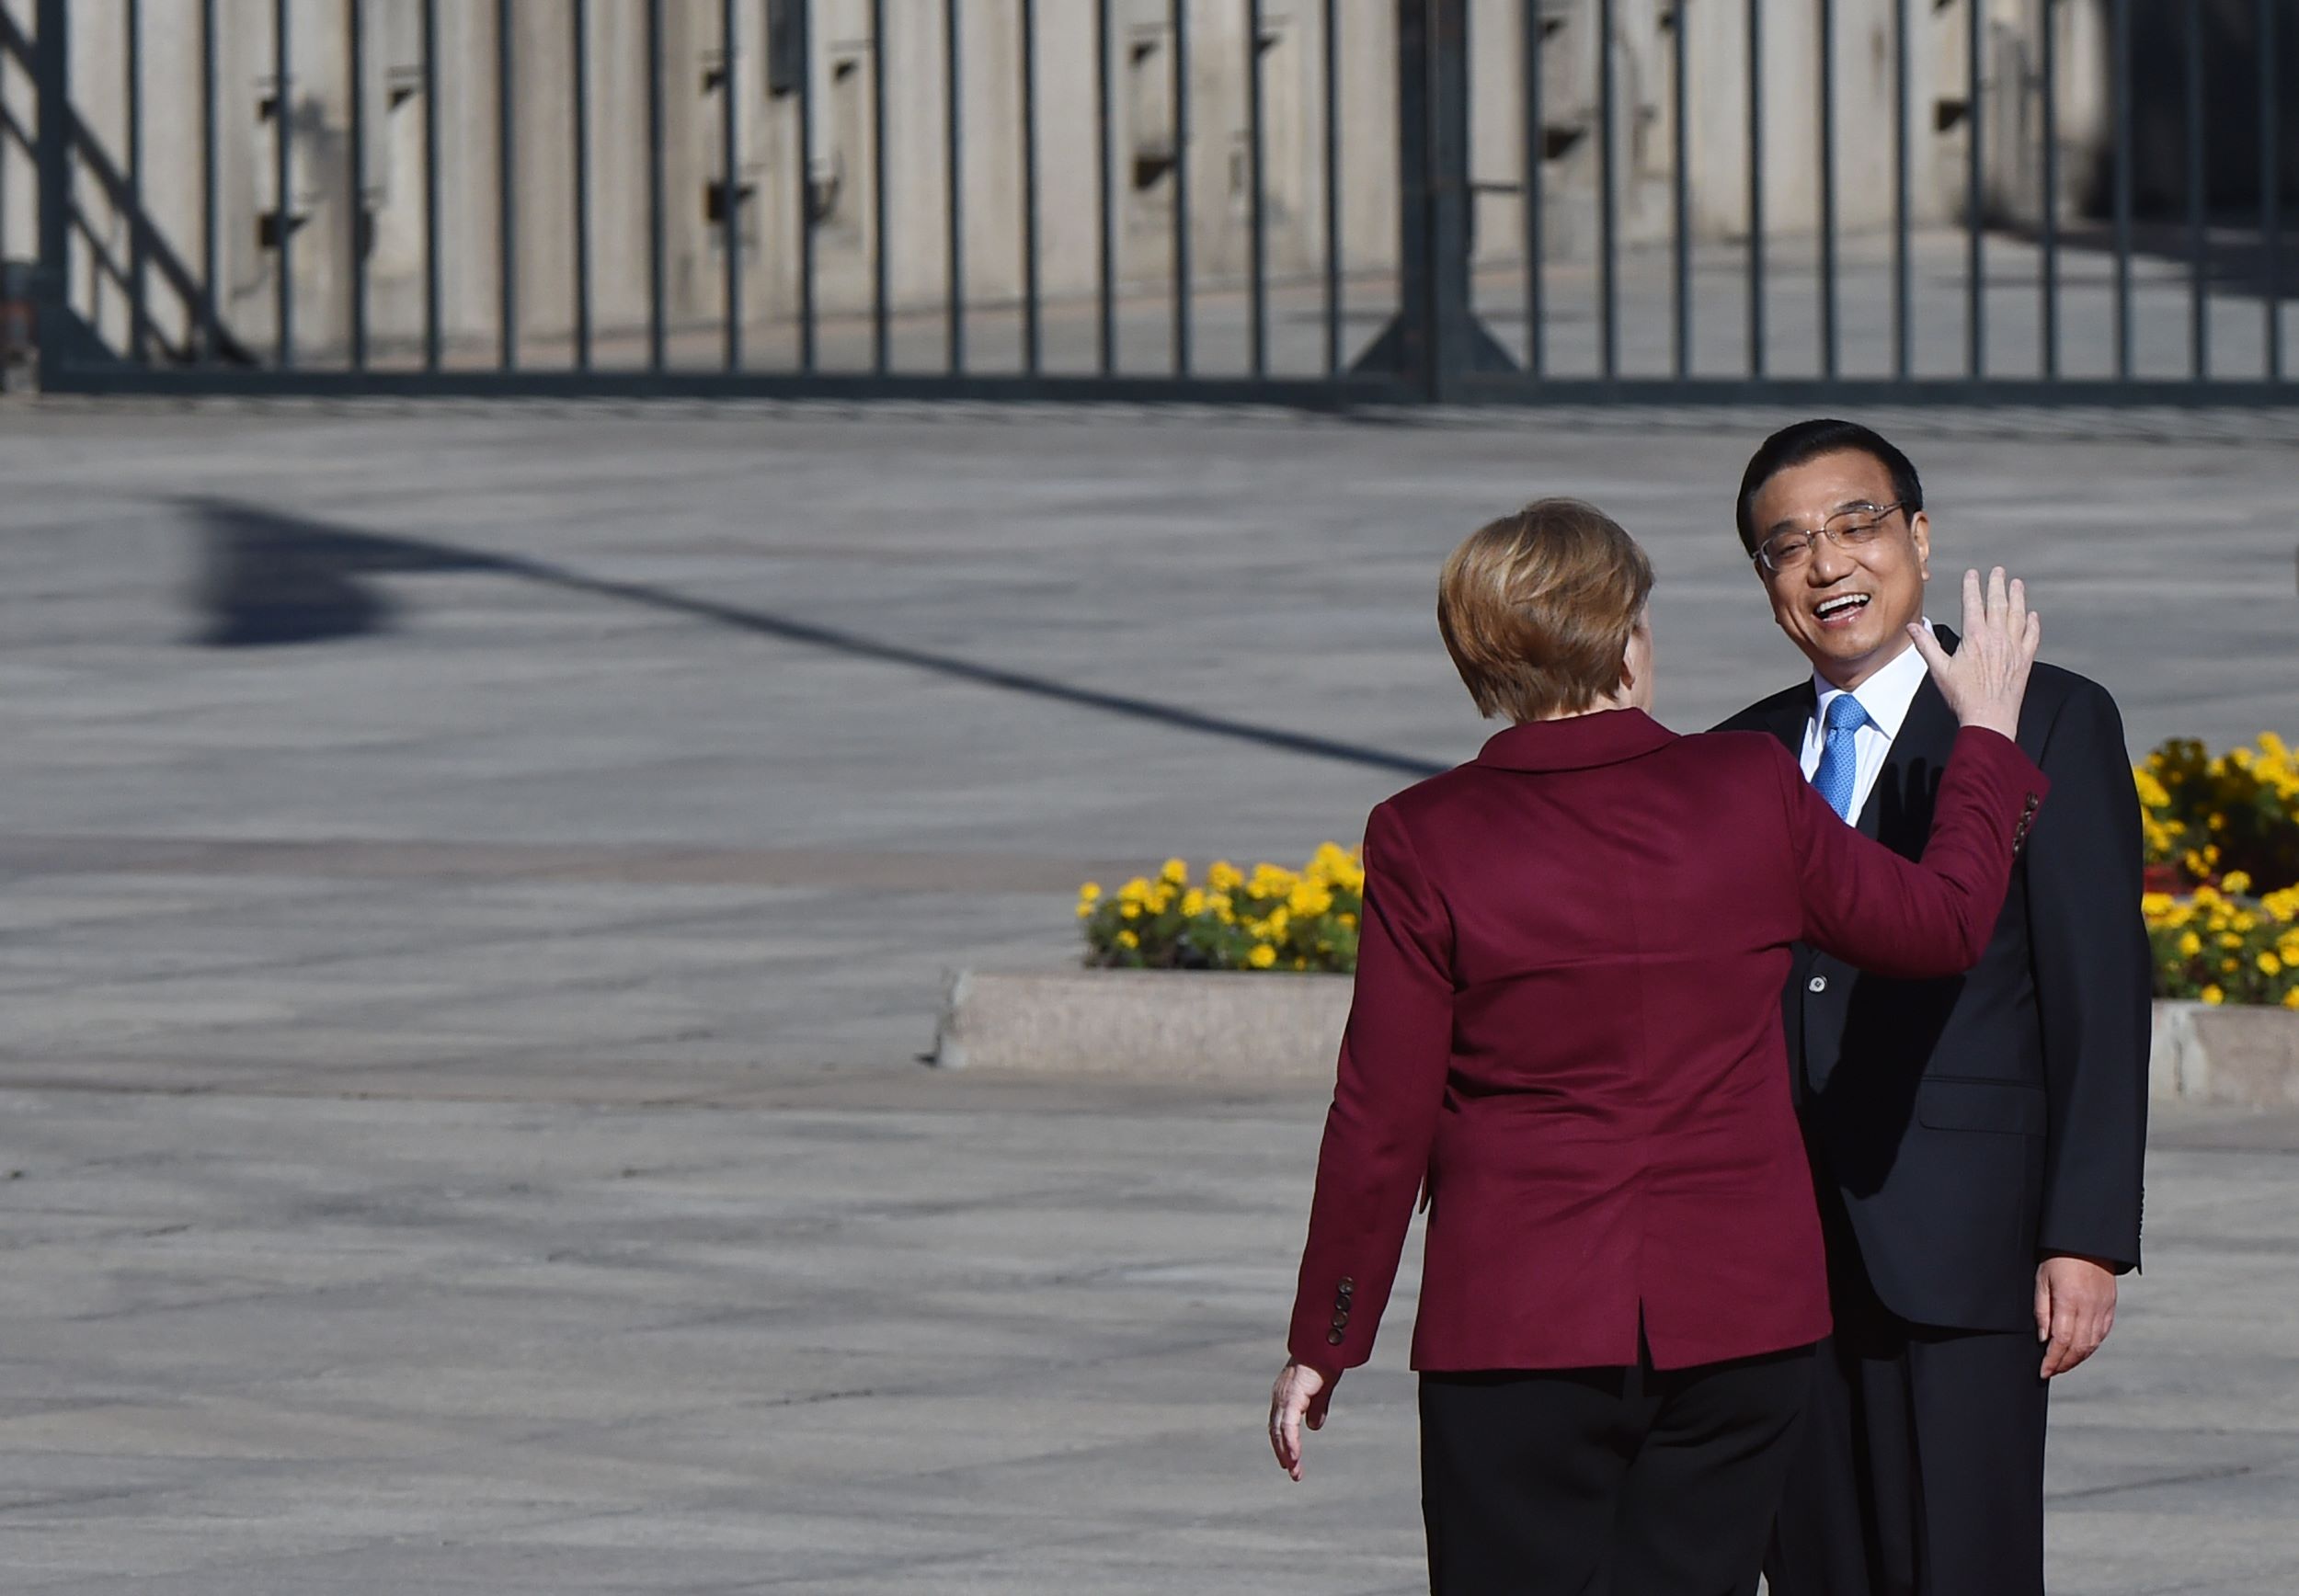 German Chancellor Angela Merkel chats with Chinese Premier Li Keqiang during a welcome ceremony outside the Great Hall of the People in Beijing on Thursday. Photo: AFP